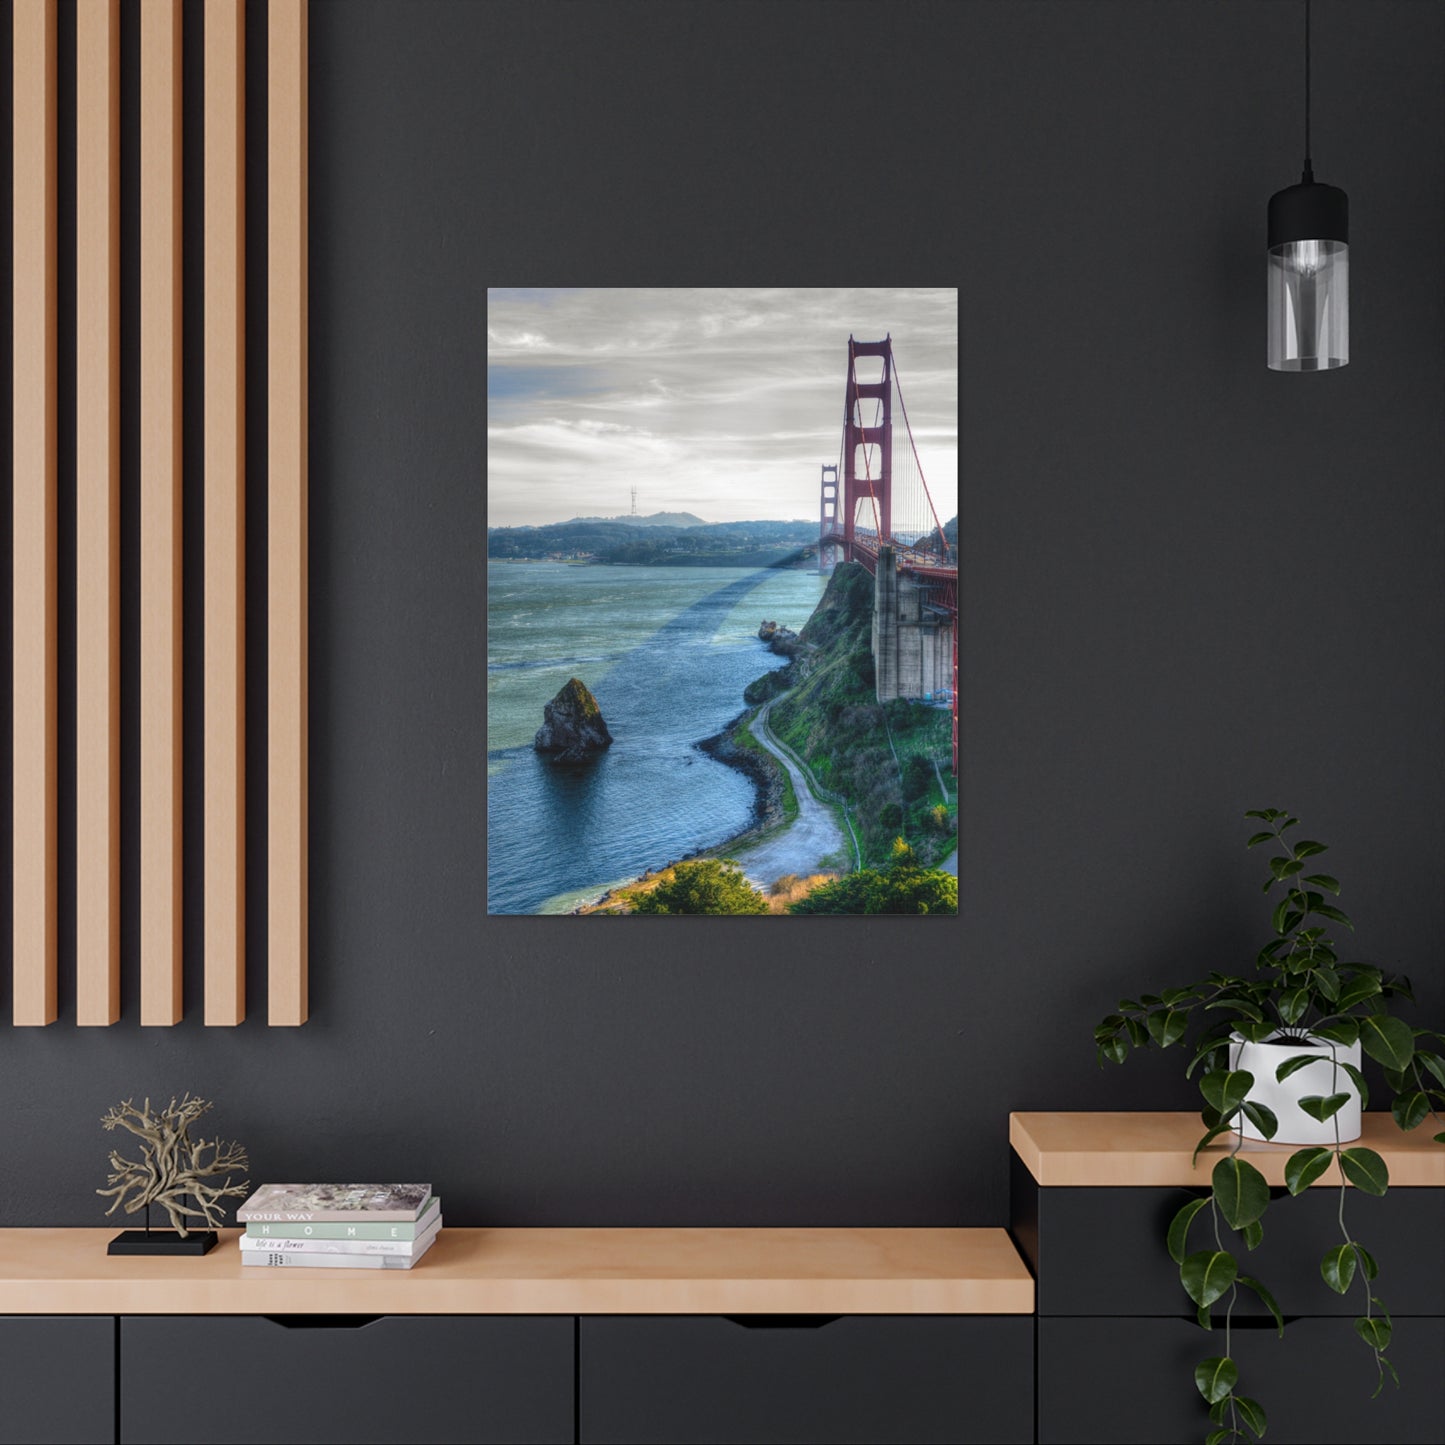 Canvas Print Of The Golden Gate Bridge And Bay In San Francisco For Wall Art